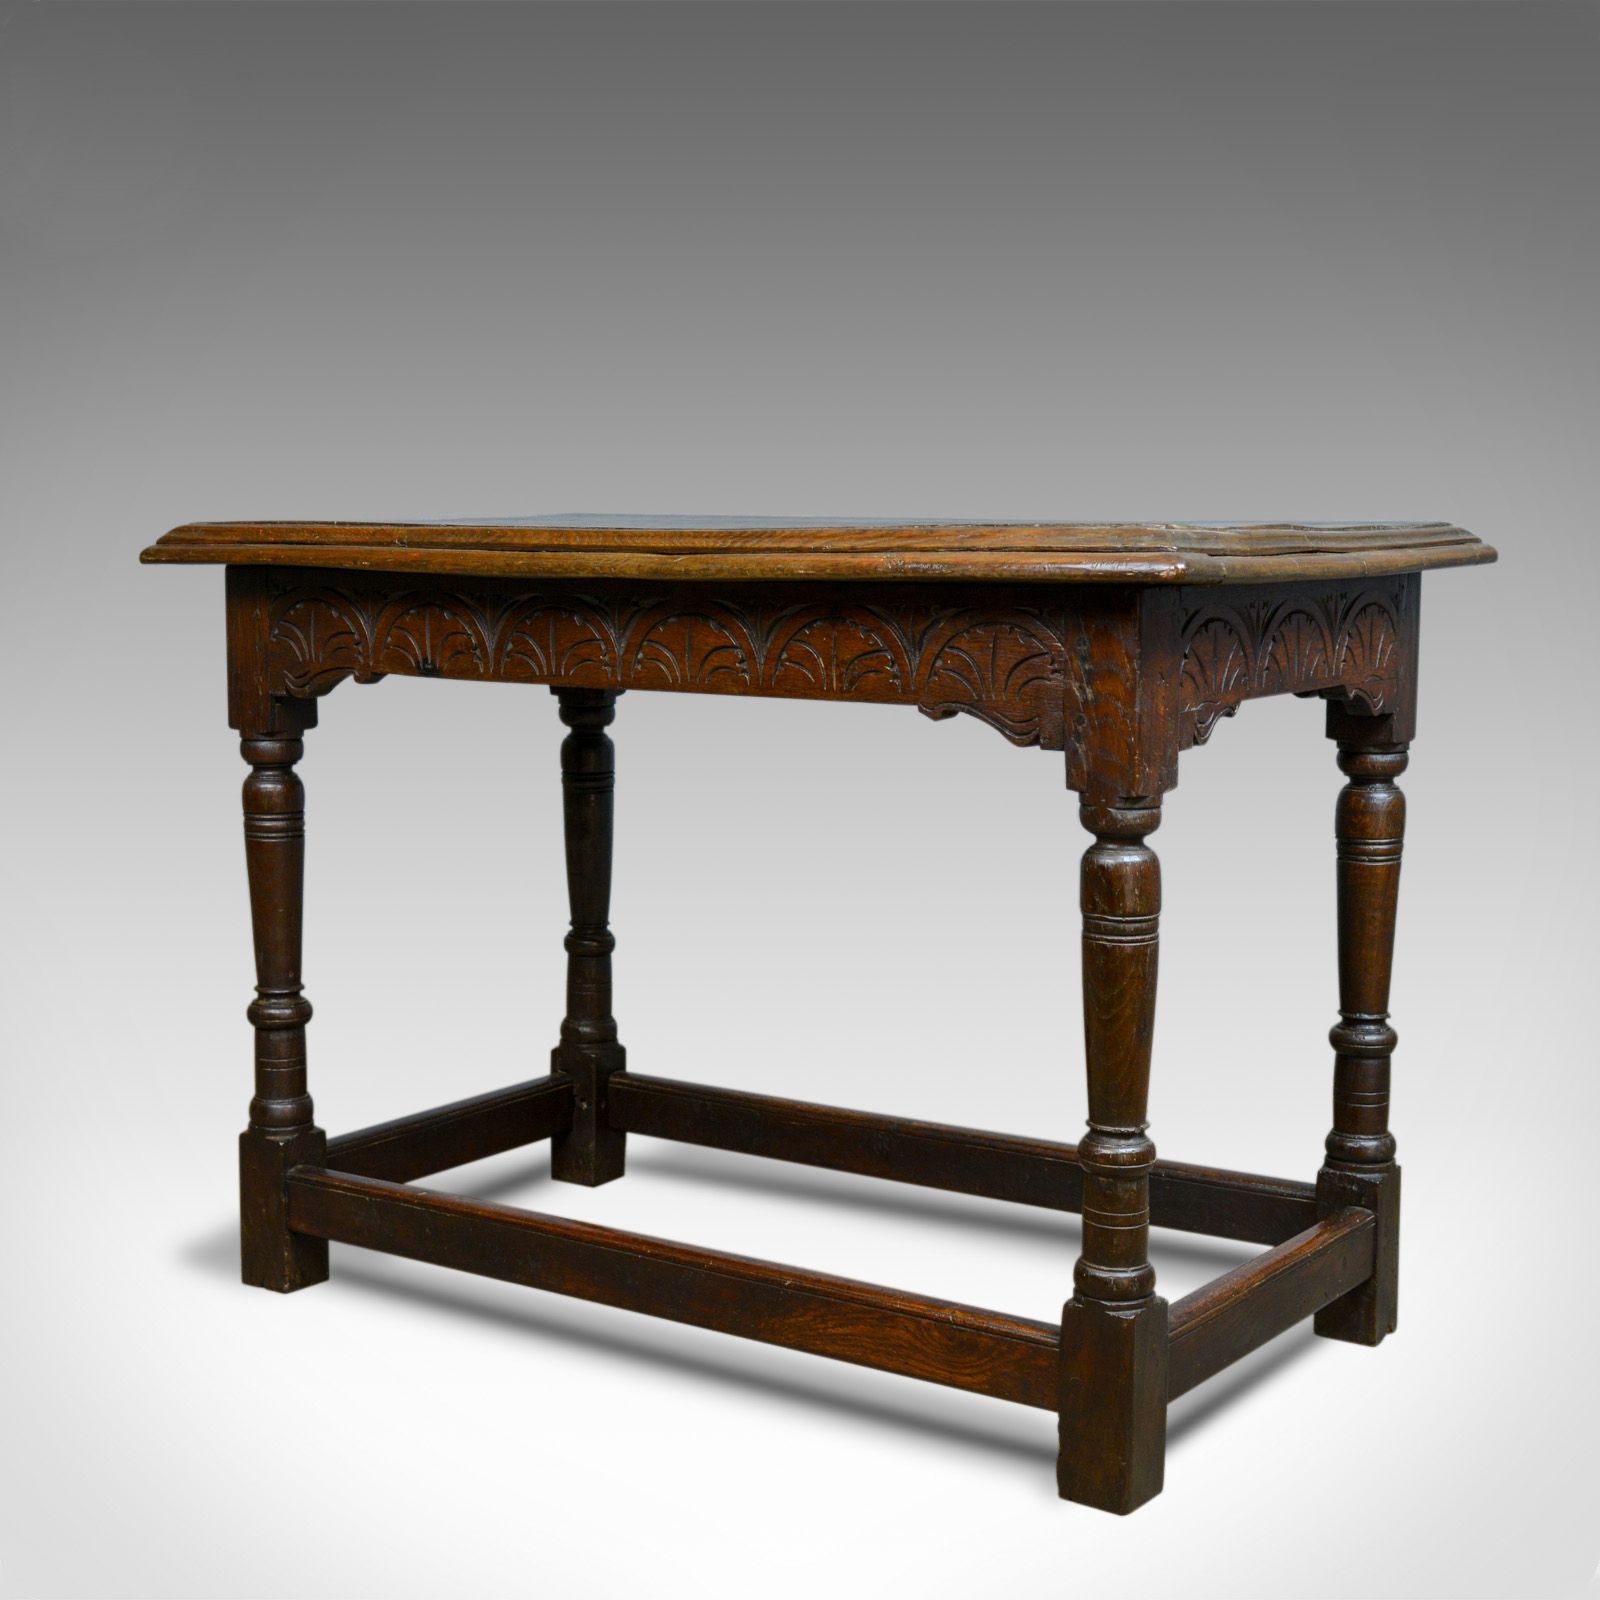 1 Shelf Square Console Tables Throughout Best And Newest Antique Oak Console Table, English, Jacobean Revival (View 6 of 10)